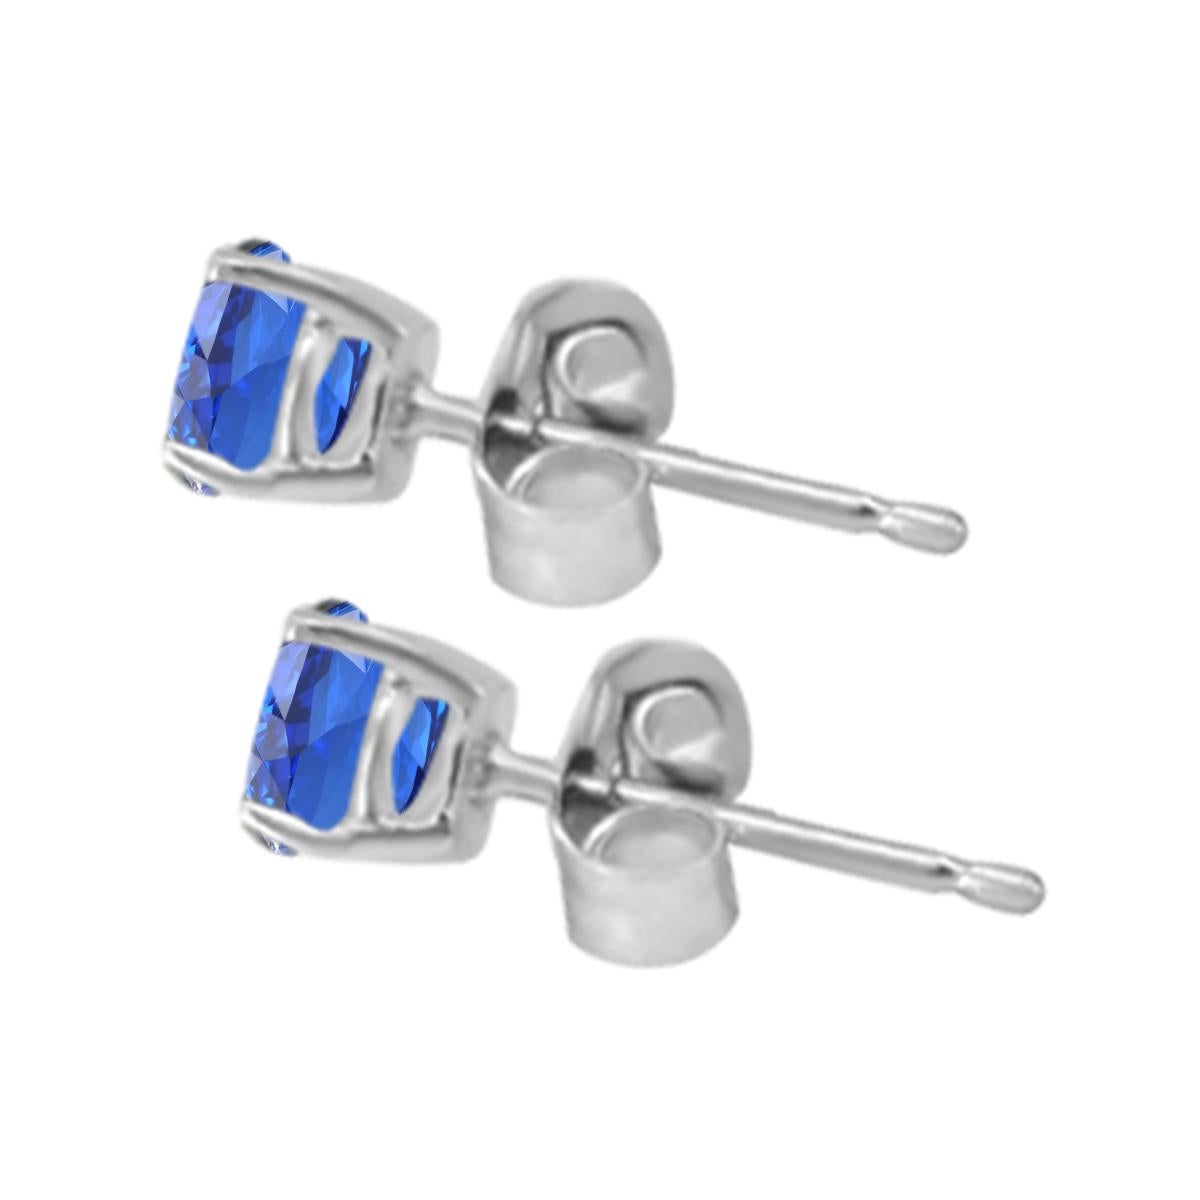 Let Your Ears Shine With These Vibrant Tanzanite Earring.
Tanzanite Bring A Touch Of Color And Sparkles, These Breathtaking Earring Are An Embodiment Of Elegance With Tanzanite Being One Of The World's Most Desired Stone.
These 4MM Stones Are Set In